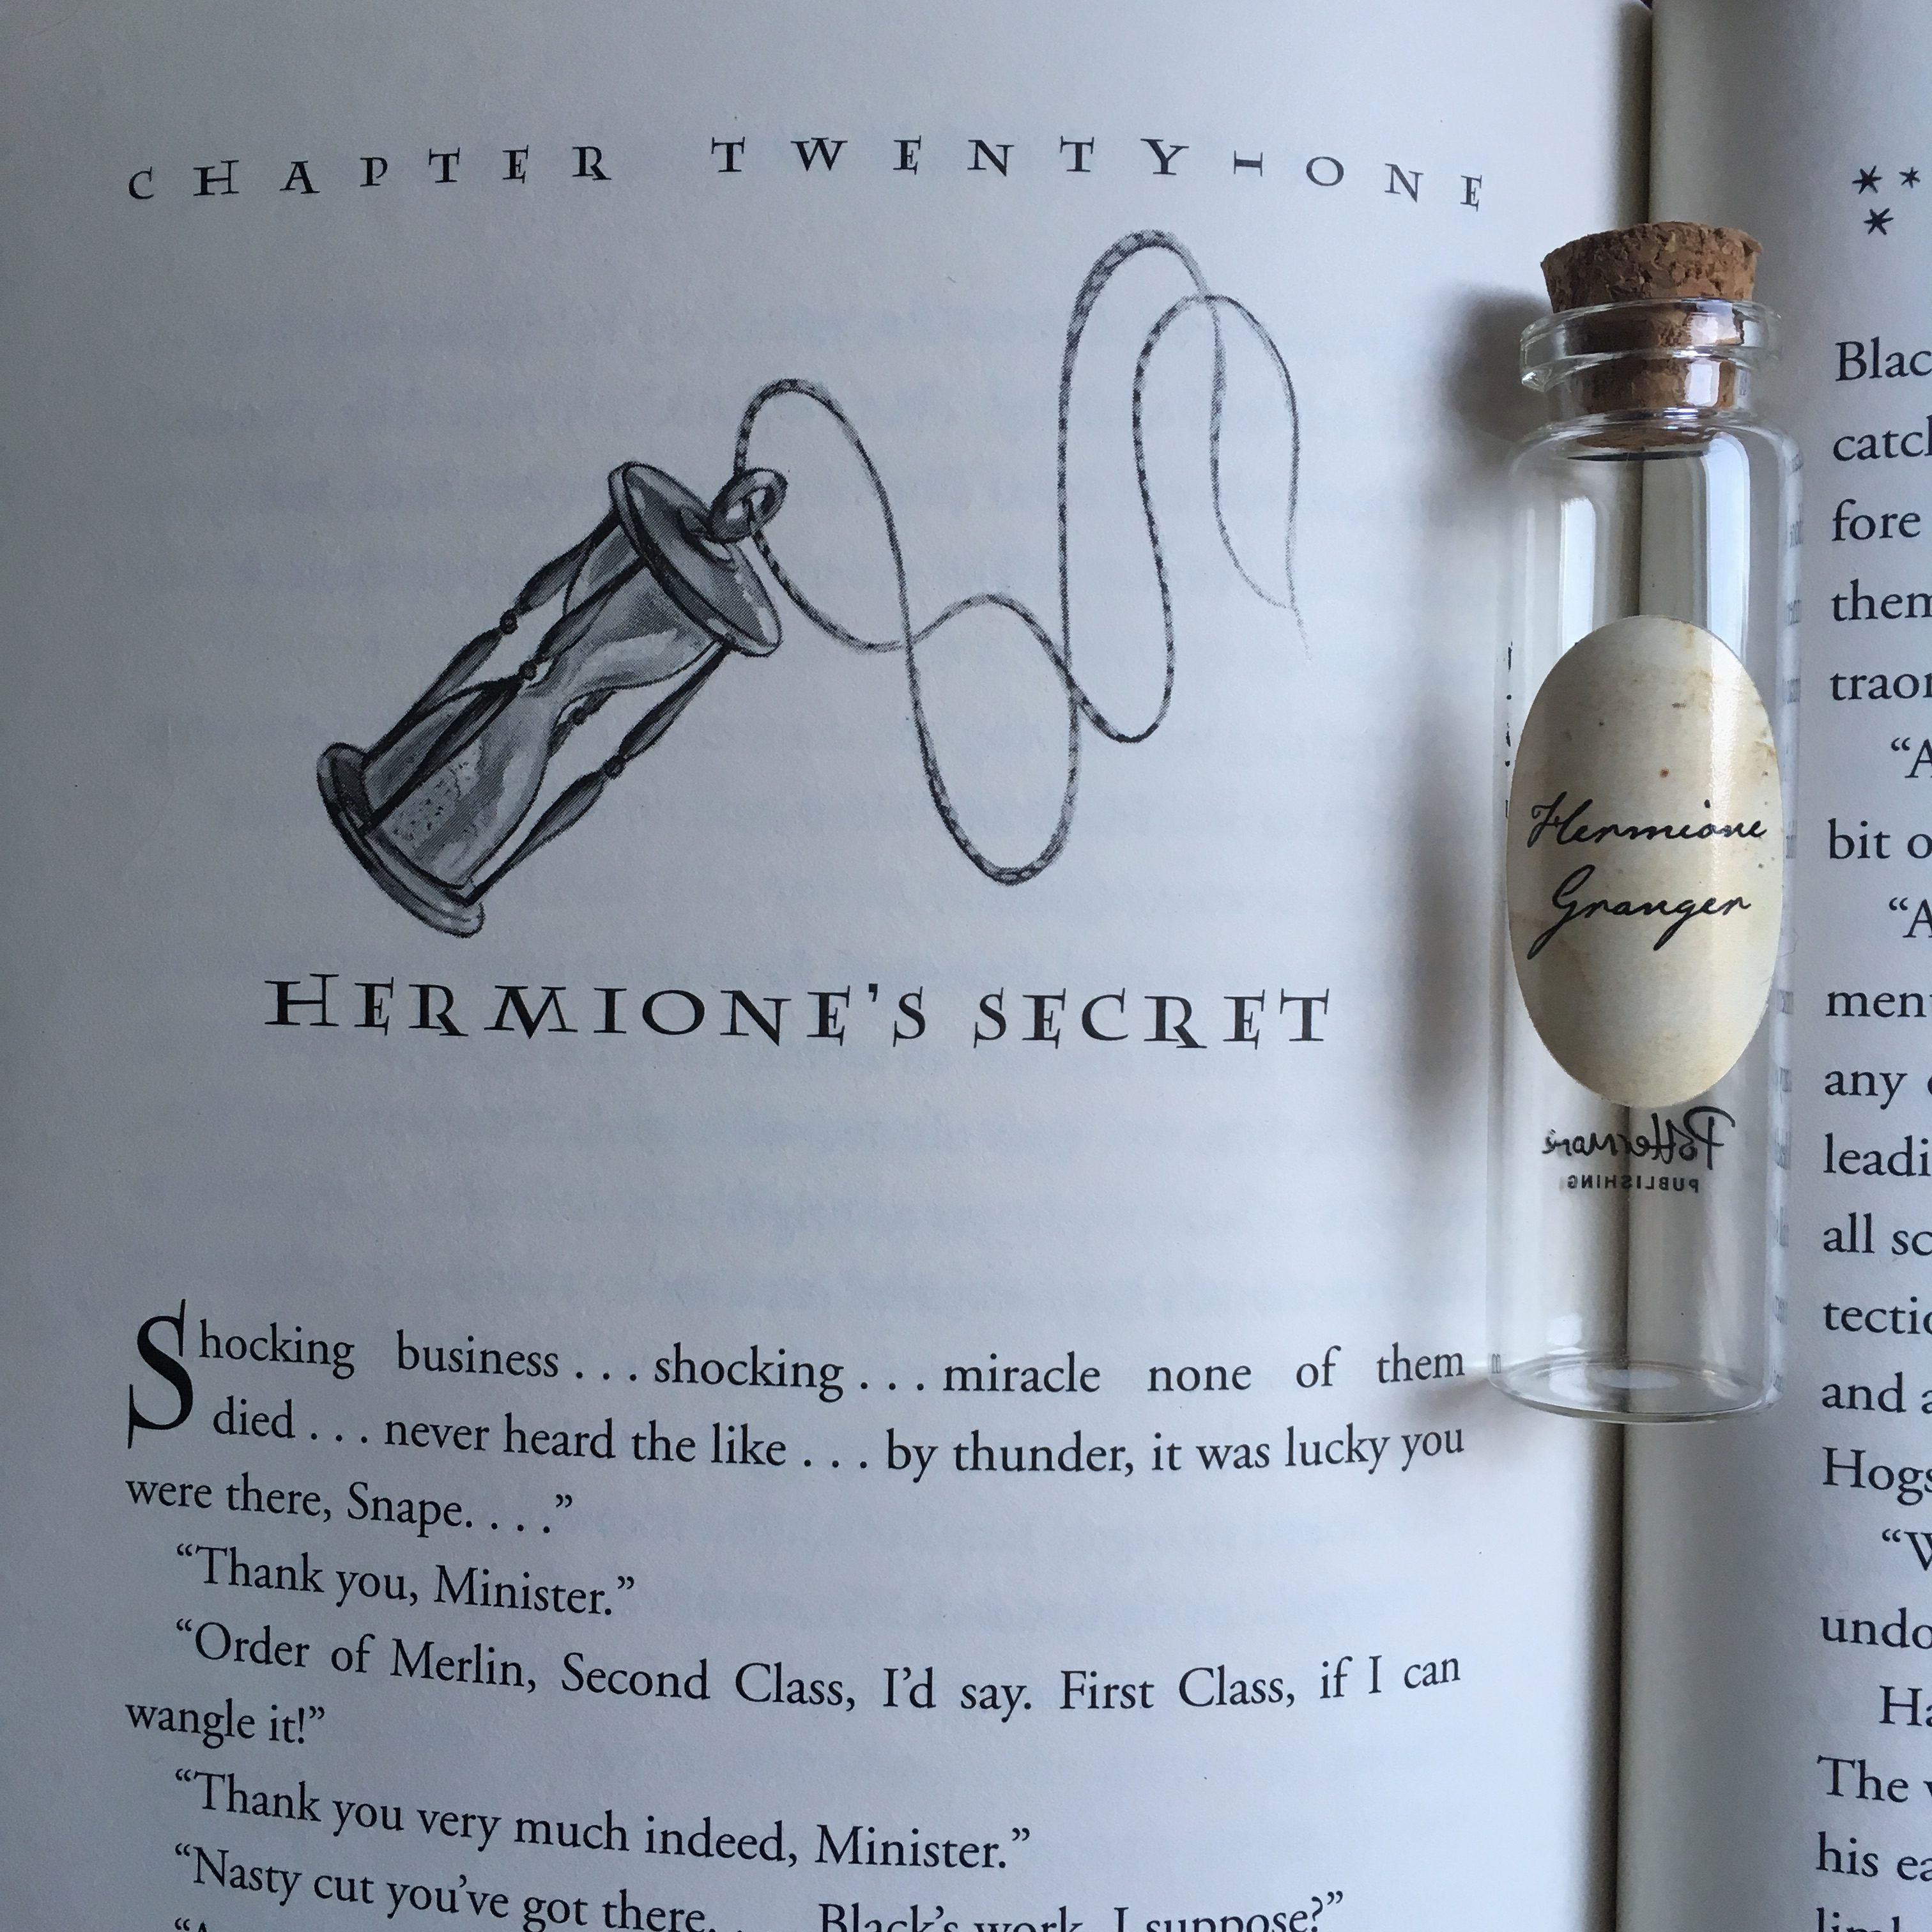 Hermione Granger’s Pensieve vial lying on top of the first page of Chapter 21, “Hermione’s Secret,” in “Harry Potter and the Prisoner of Azkaban”